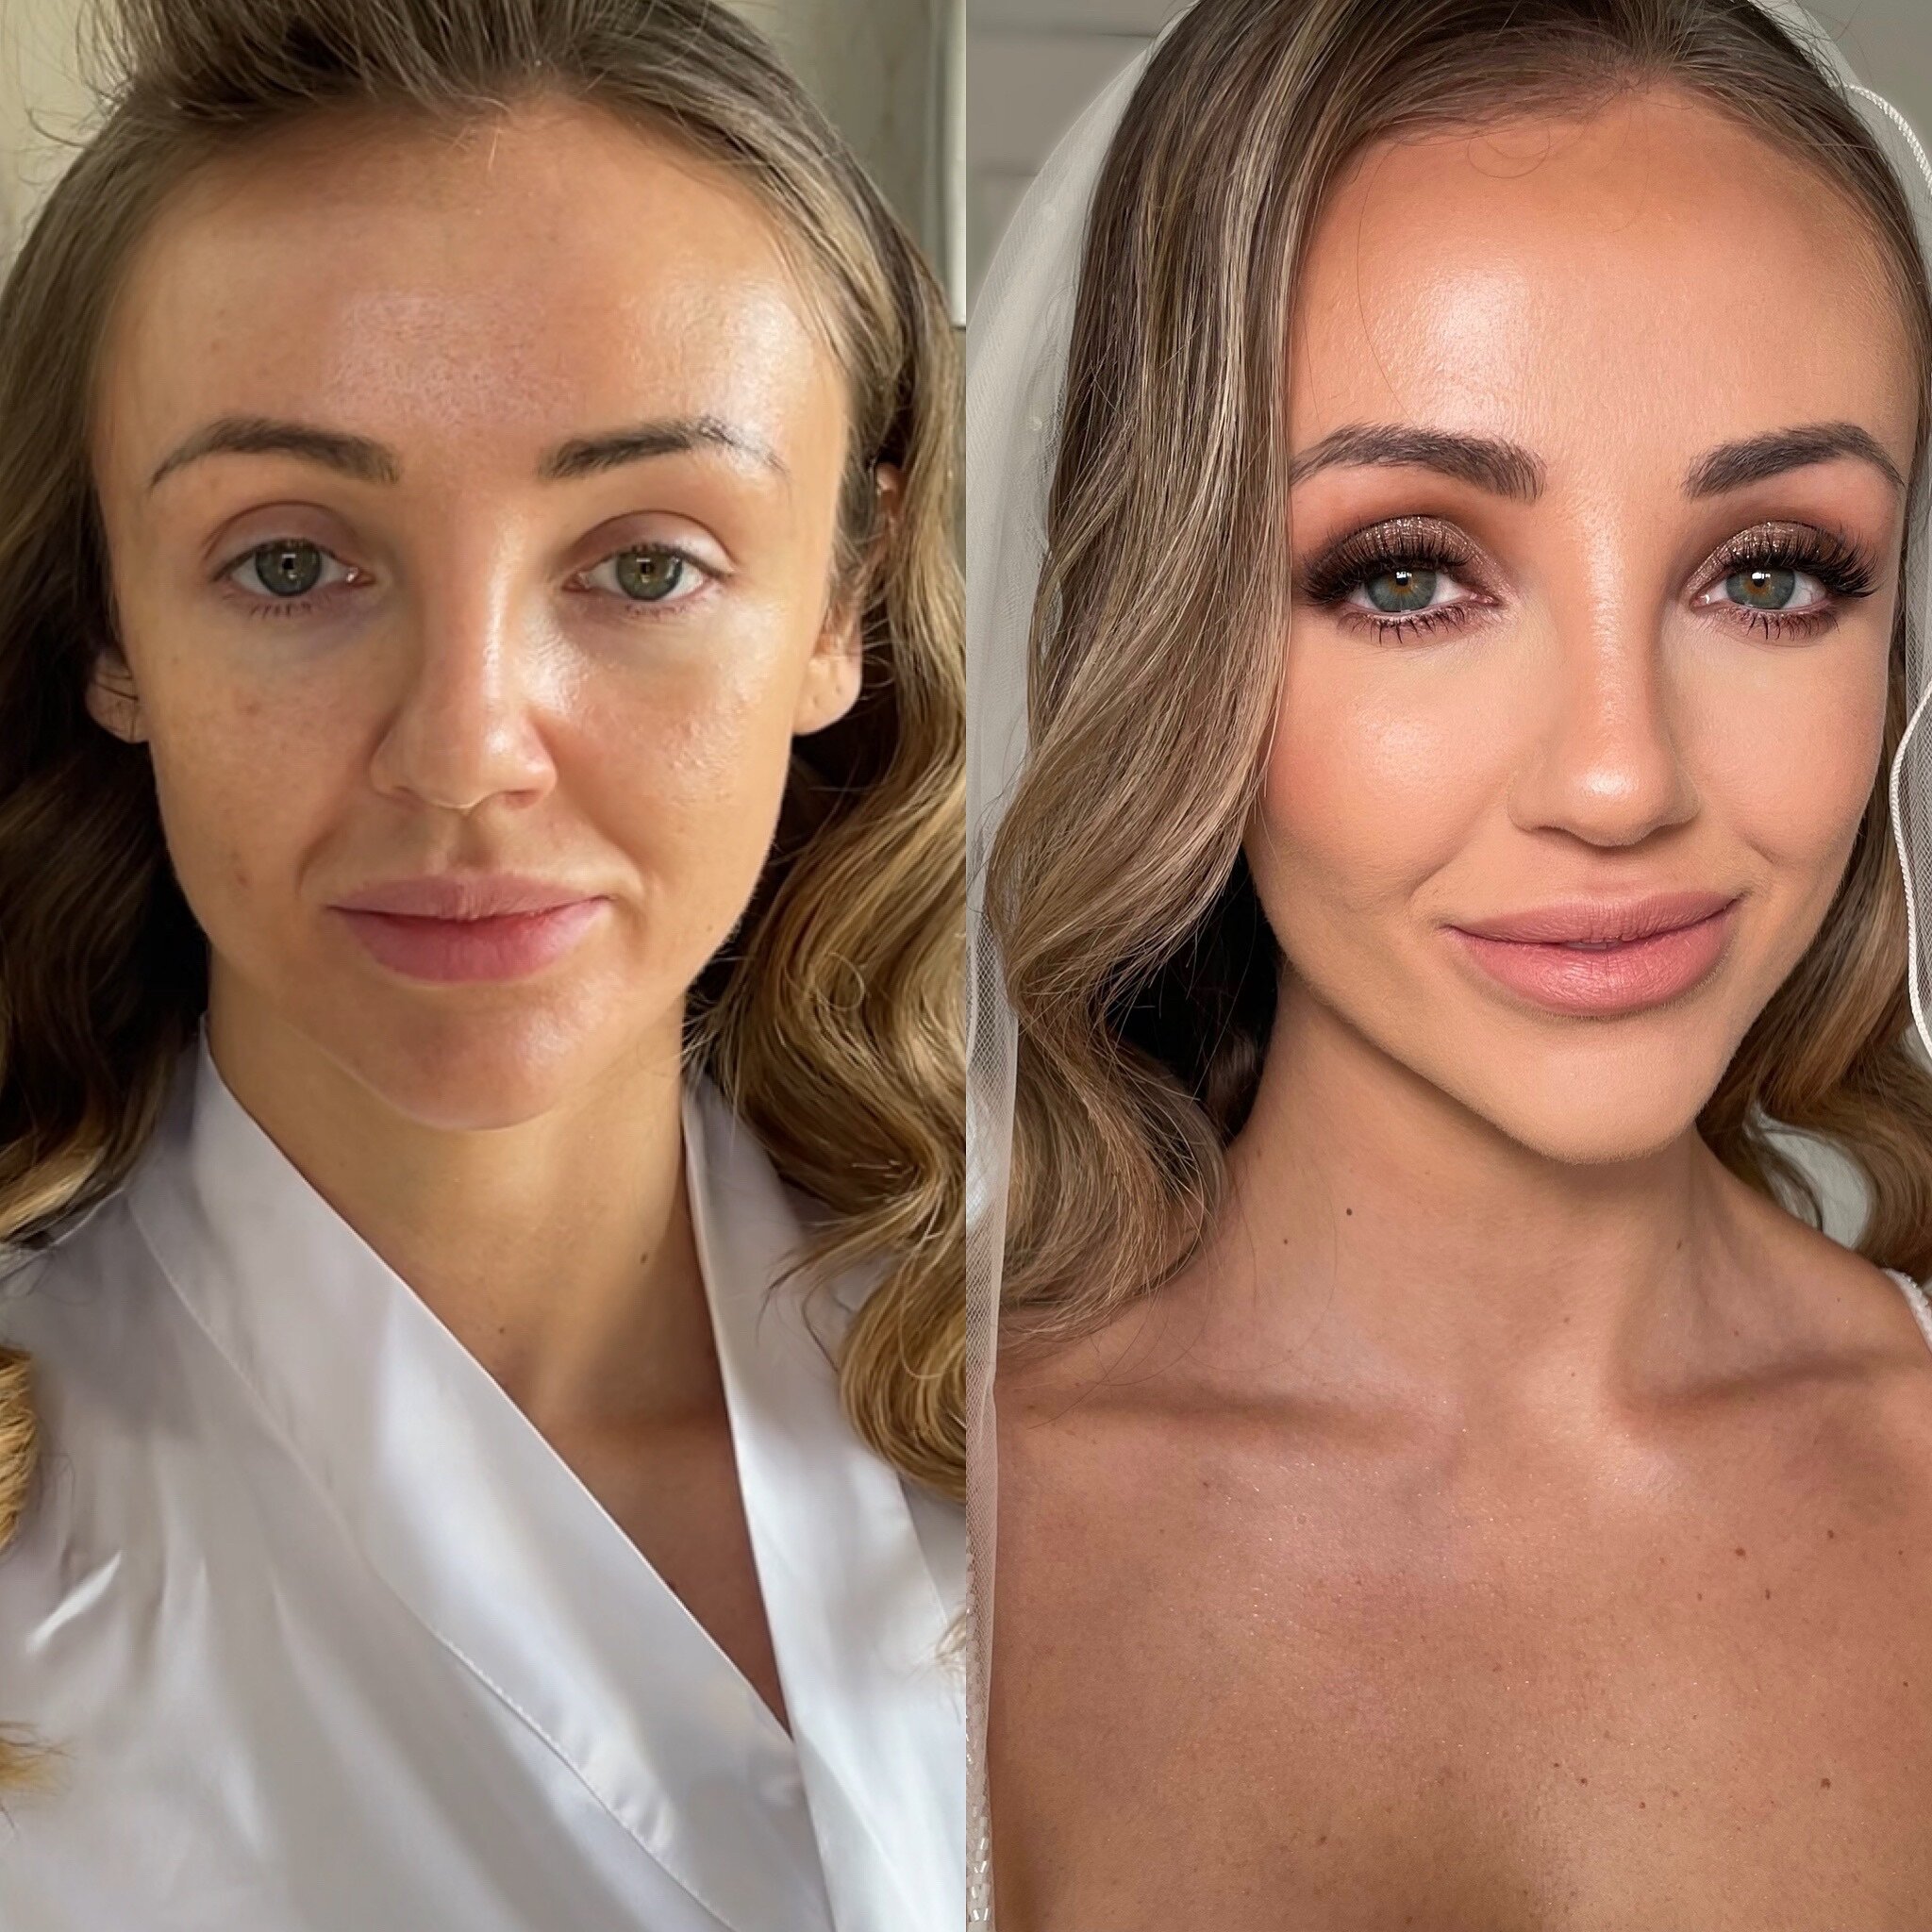 ✨ The Bridal Makeup Masterclass ✨

Bridal makeup isn&rsquo;t &lsquo;just makeup&rsquo;. It absolutely has to be : 

FLAWLESS, CAMERA FRIENDLY, COMFORTABLE TO WEAR AND SEAMLESS to ensure your bride is happy with the makeup for her most special day! 

